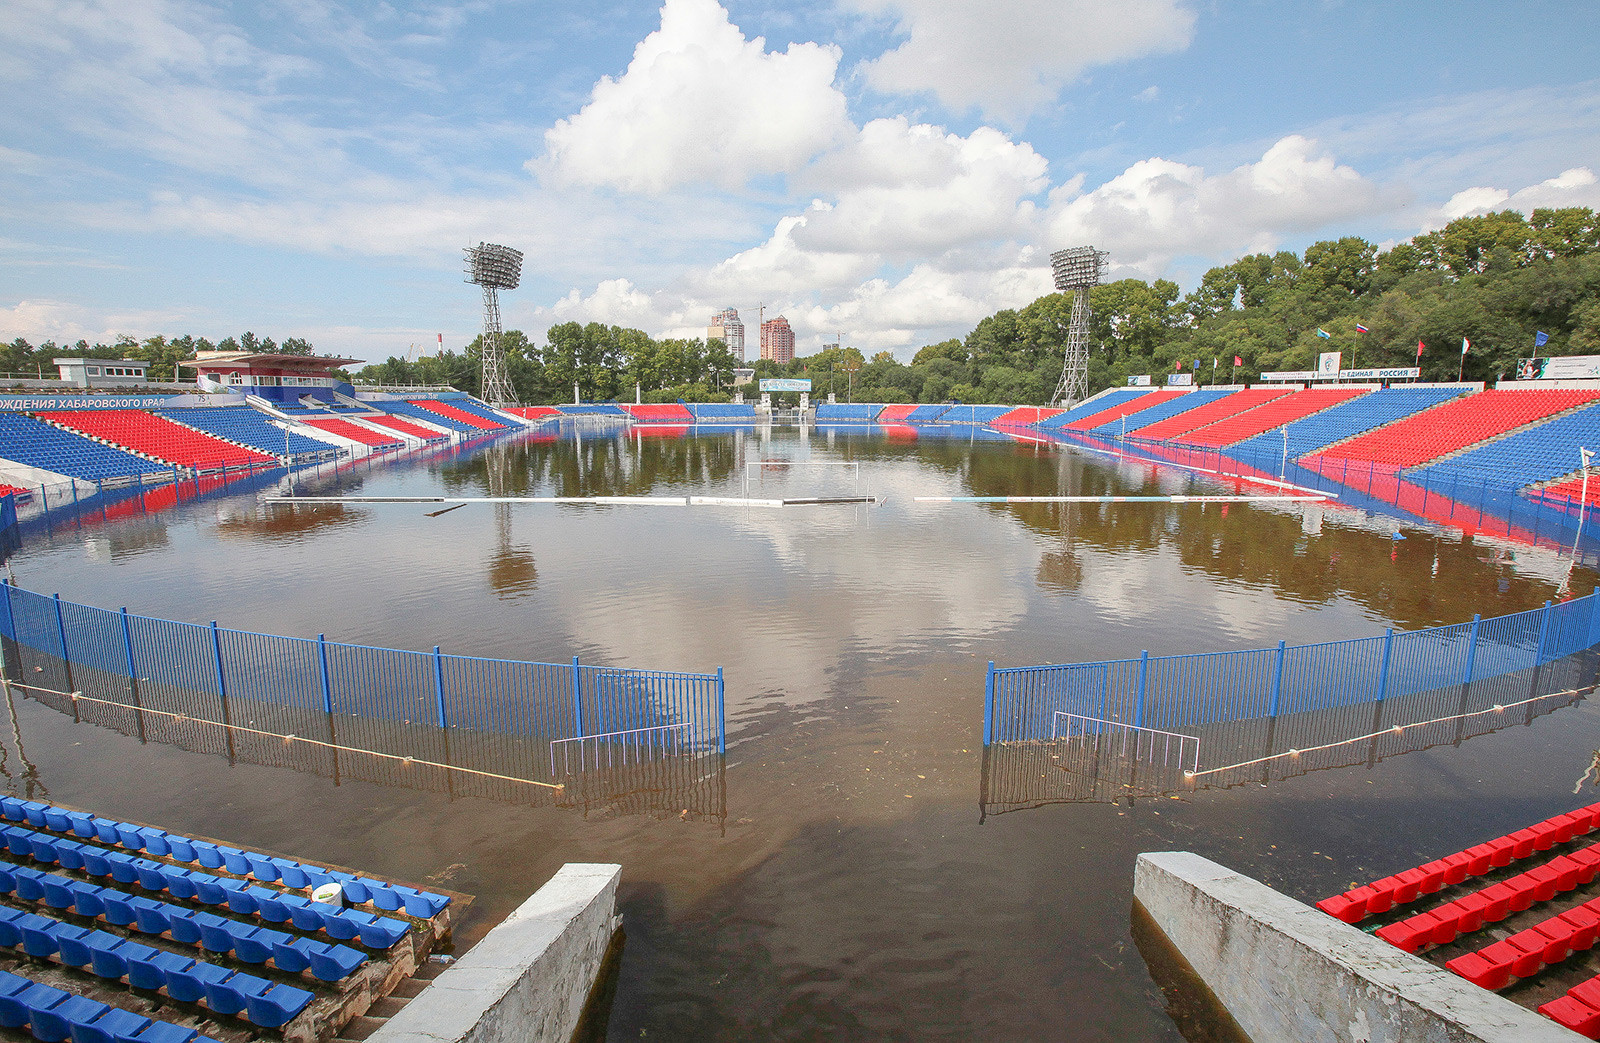 A view of the desolate and flooded Lenin Stadium, which is the home arena of the local soccer club SKA-Energiya, is seen in Khabarovsk.